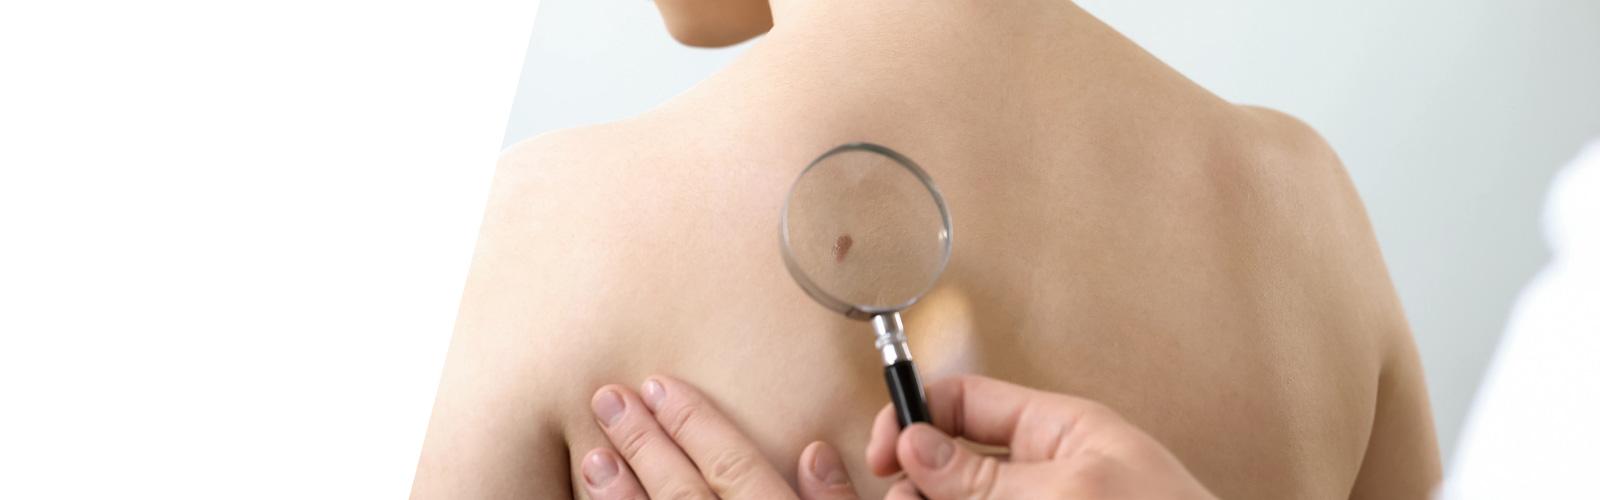 Examination of skin lesion on back of patient in a clinic setting